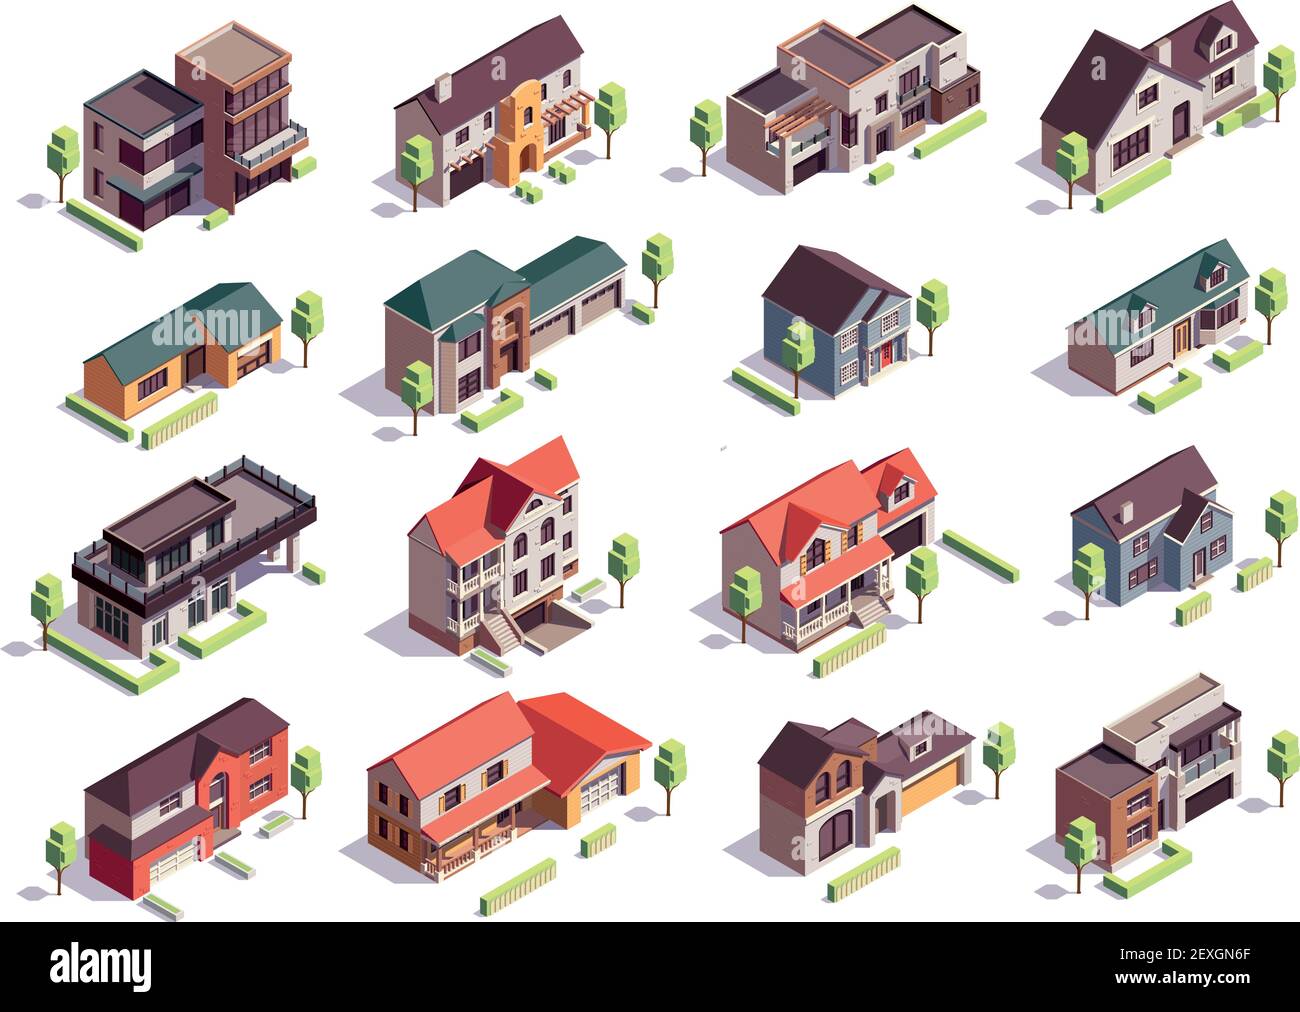 Suburbian buildings isometric composition with sixteen isolated images of modern residential houses with garages and trees vector illustration Stock Vector